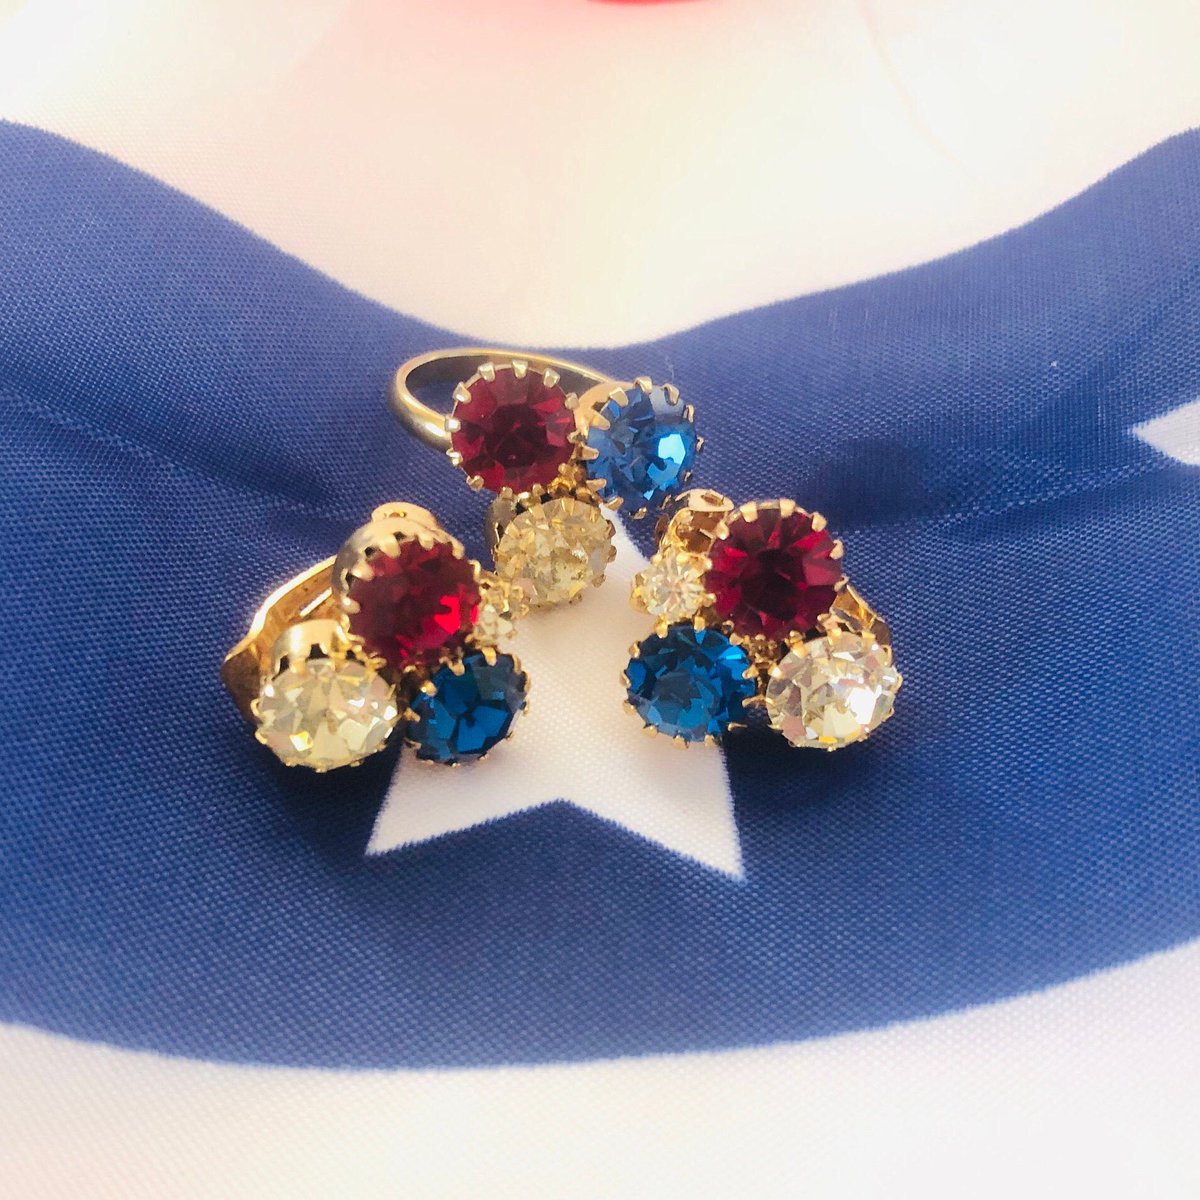 Excited to share this item from my #etsy shop: Vintage Patriotic Earrings and Ring Set, Red White and Blue Rhinestone Jewelry Set, Patriotic Rhinestone Ring and Clip on Earrings etsy.me/30abUww